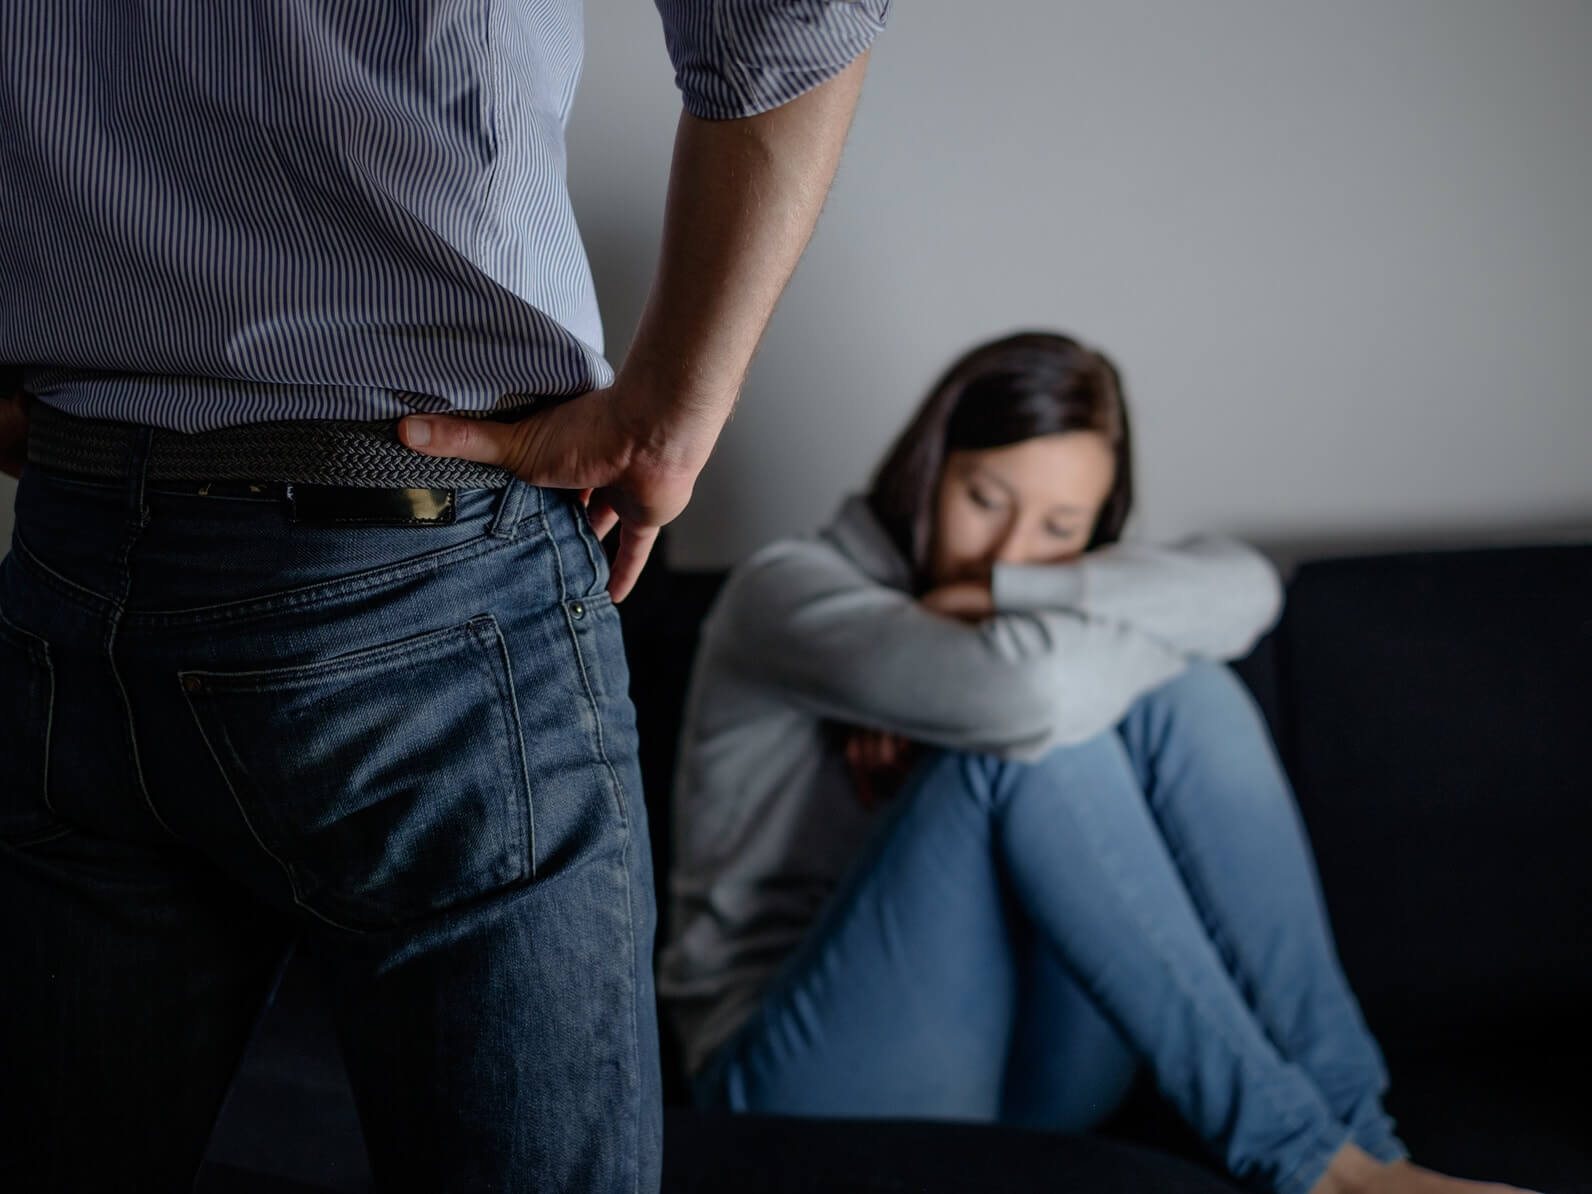 What can you do when your partner keeps putting you down?